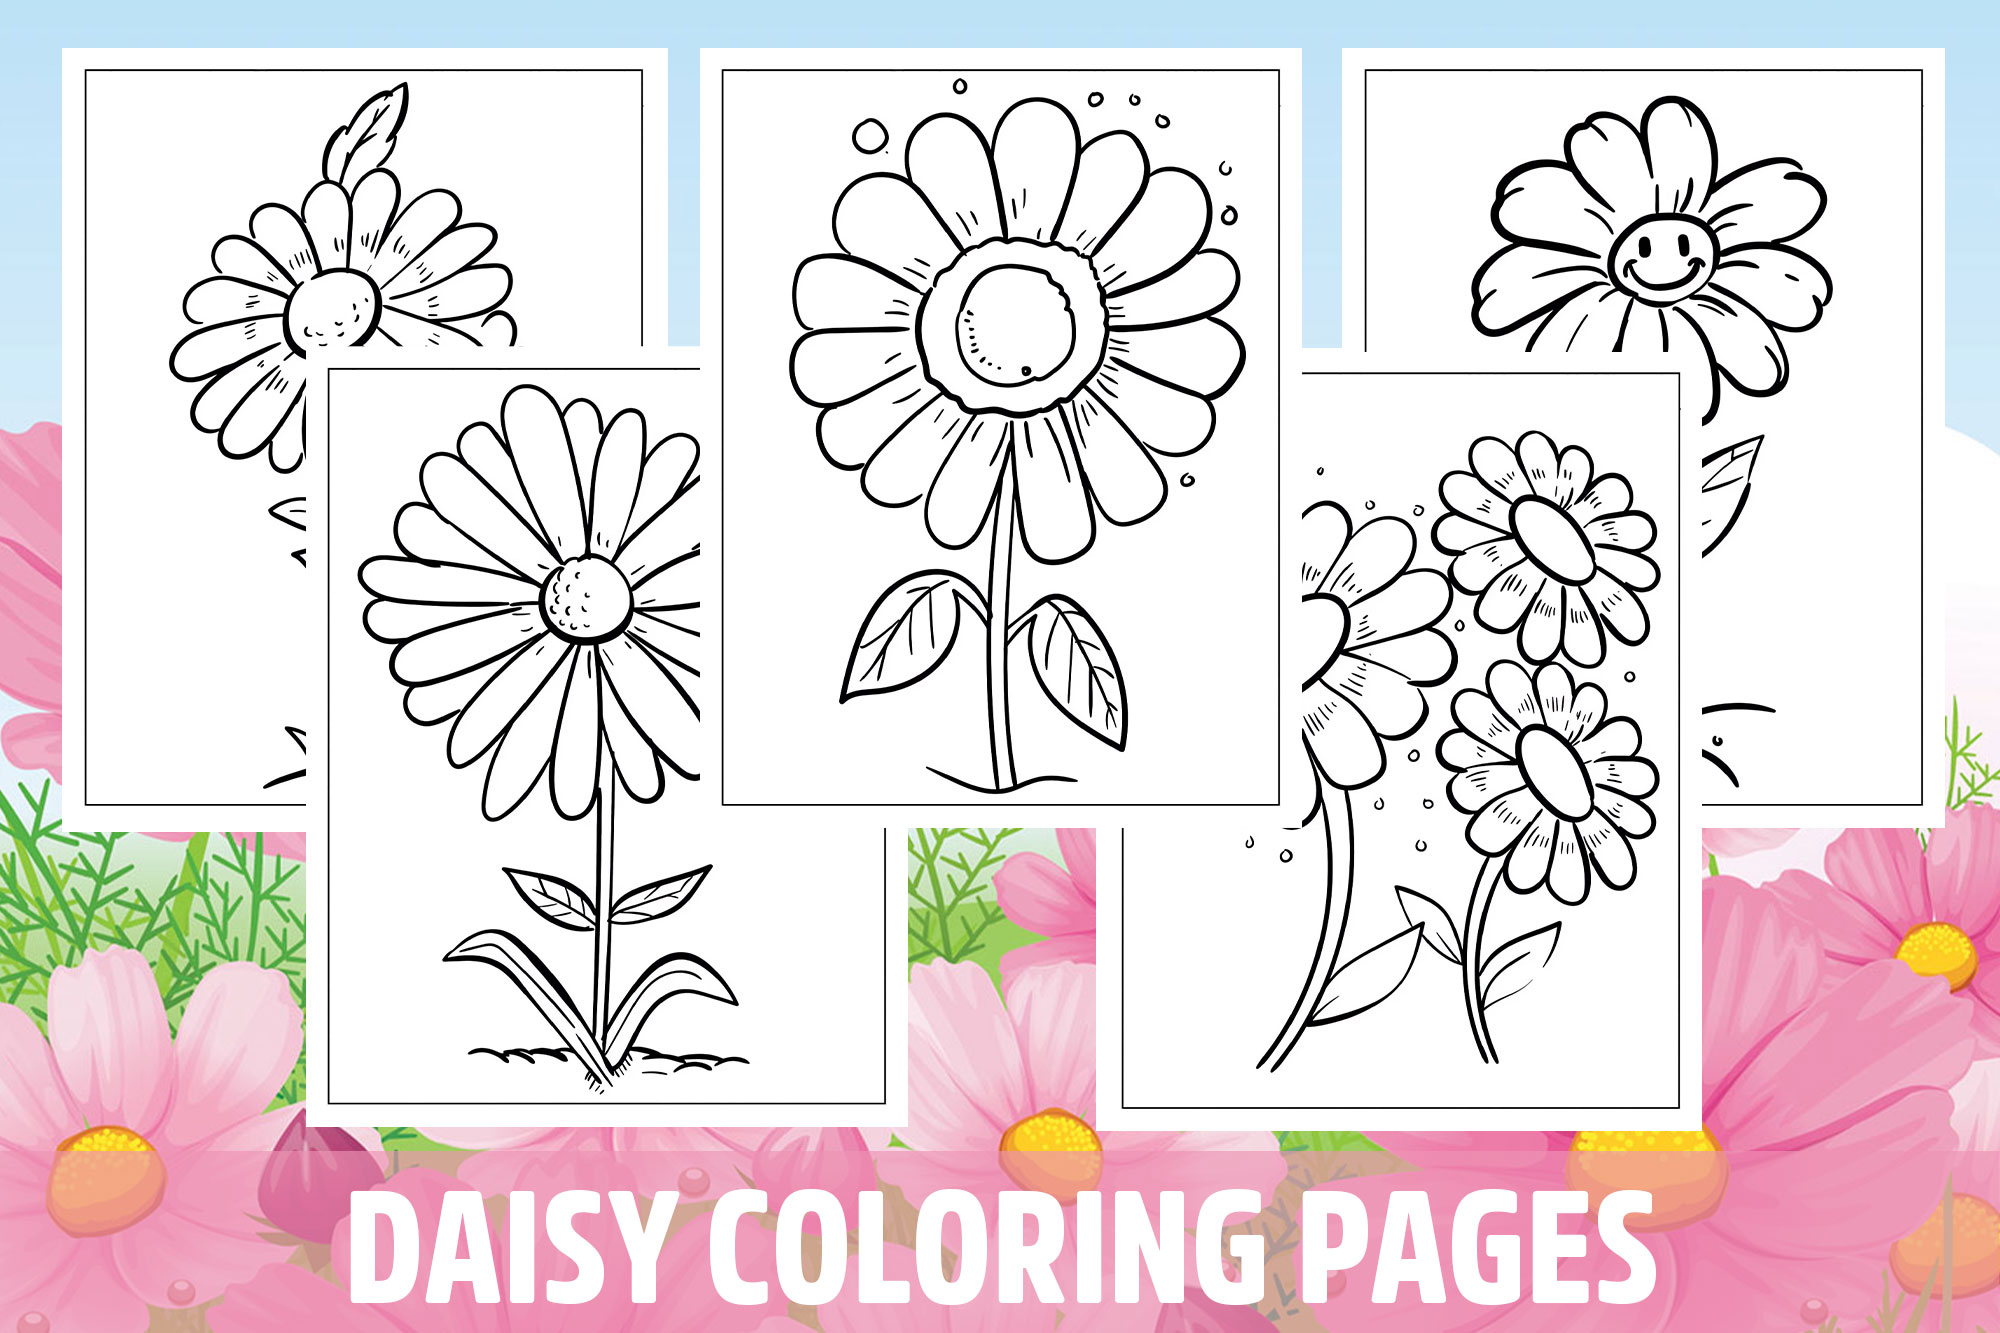 Daisy coloring pages for kids girls boys teens birthday school activity made by teachers